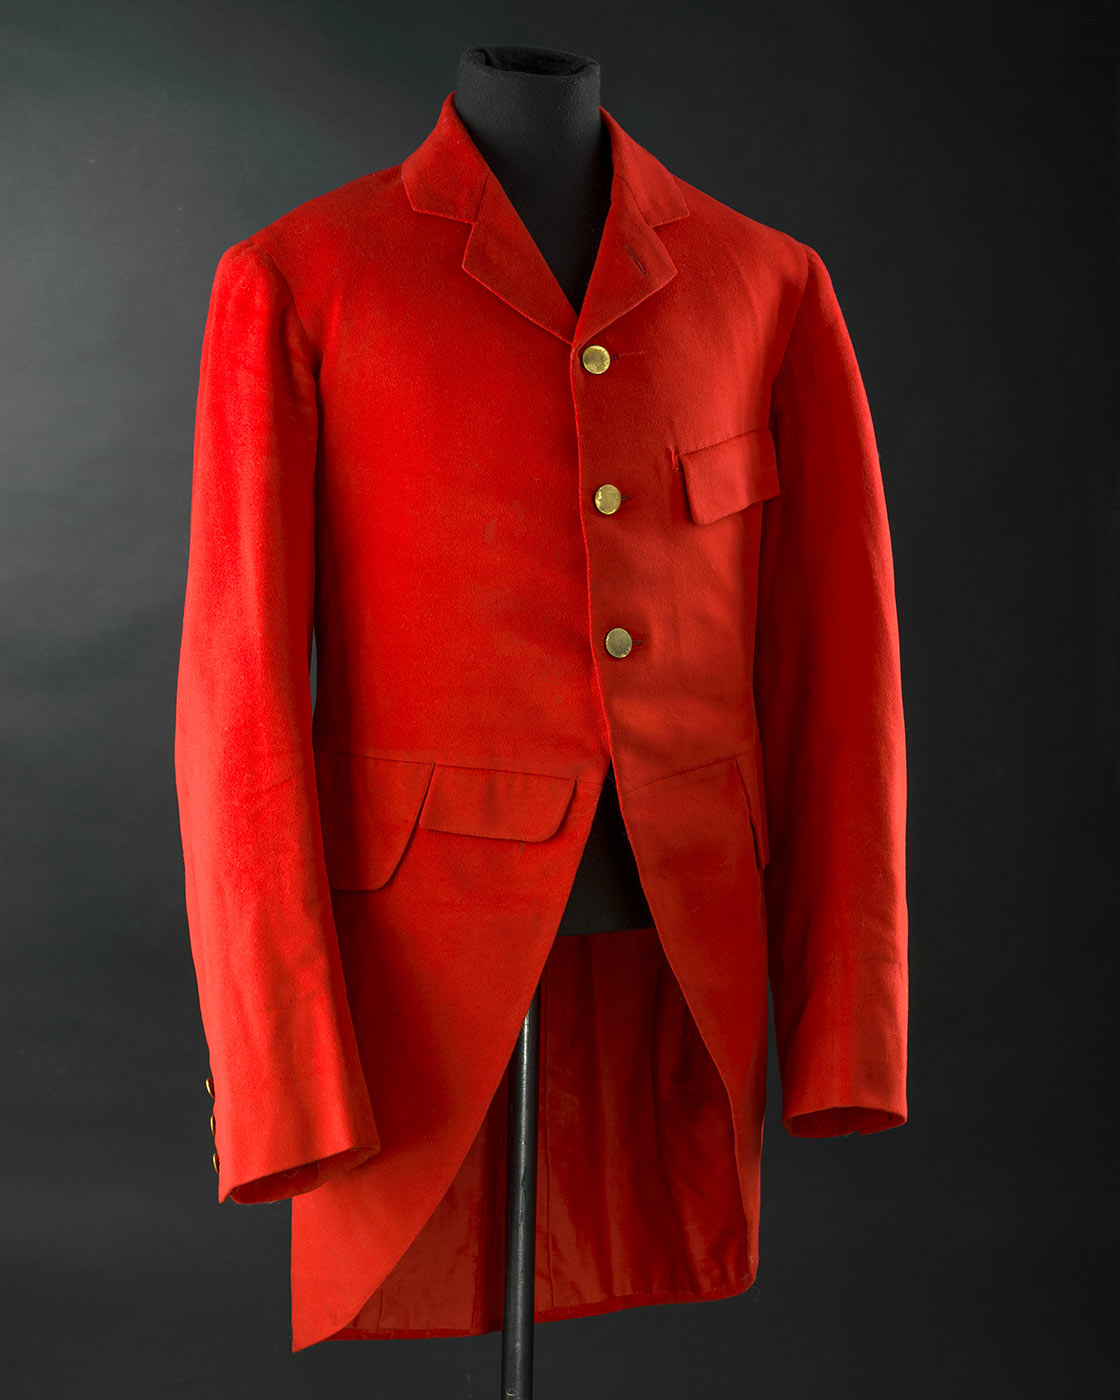 A red wool cut away jacket with tails otherwise known as hunting pinks. It has 3 brass shank buttons at front opening and 3 buttons on each cuff. It is fully lined in red cotton. The sleeves are lined in white cotton with blue stripe. The jacket has machine quilted underarm lining and a back vent with 2 brass buttons at top. It has four pockets on front with flaps. - click to view larger image